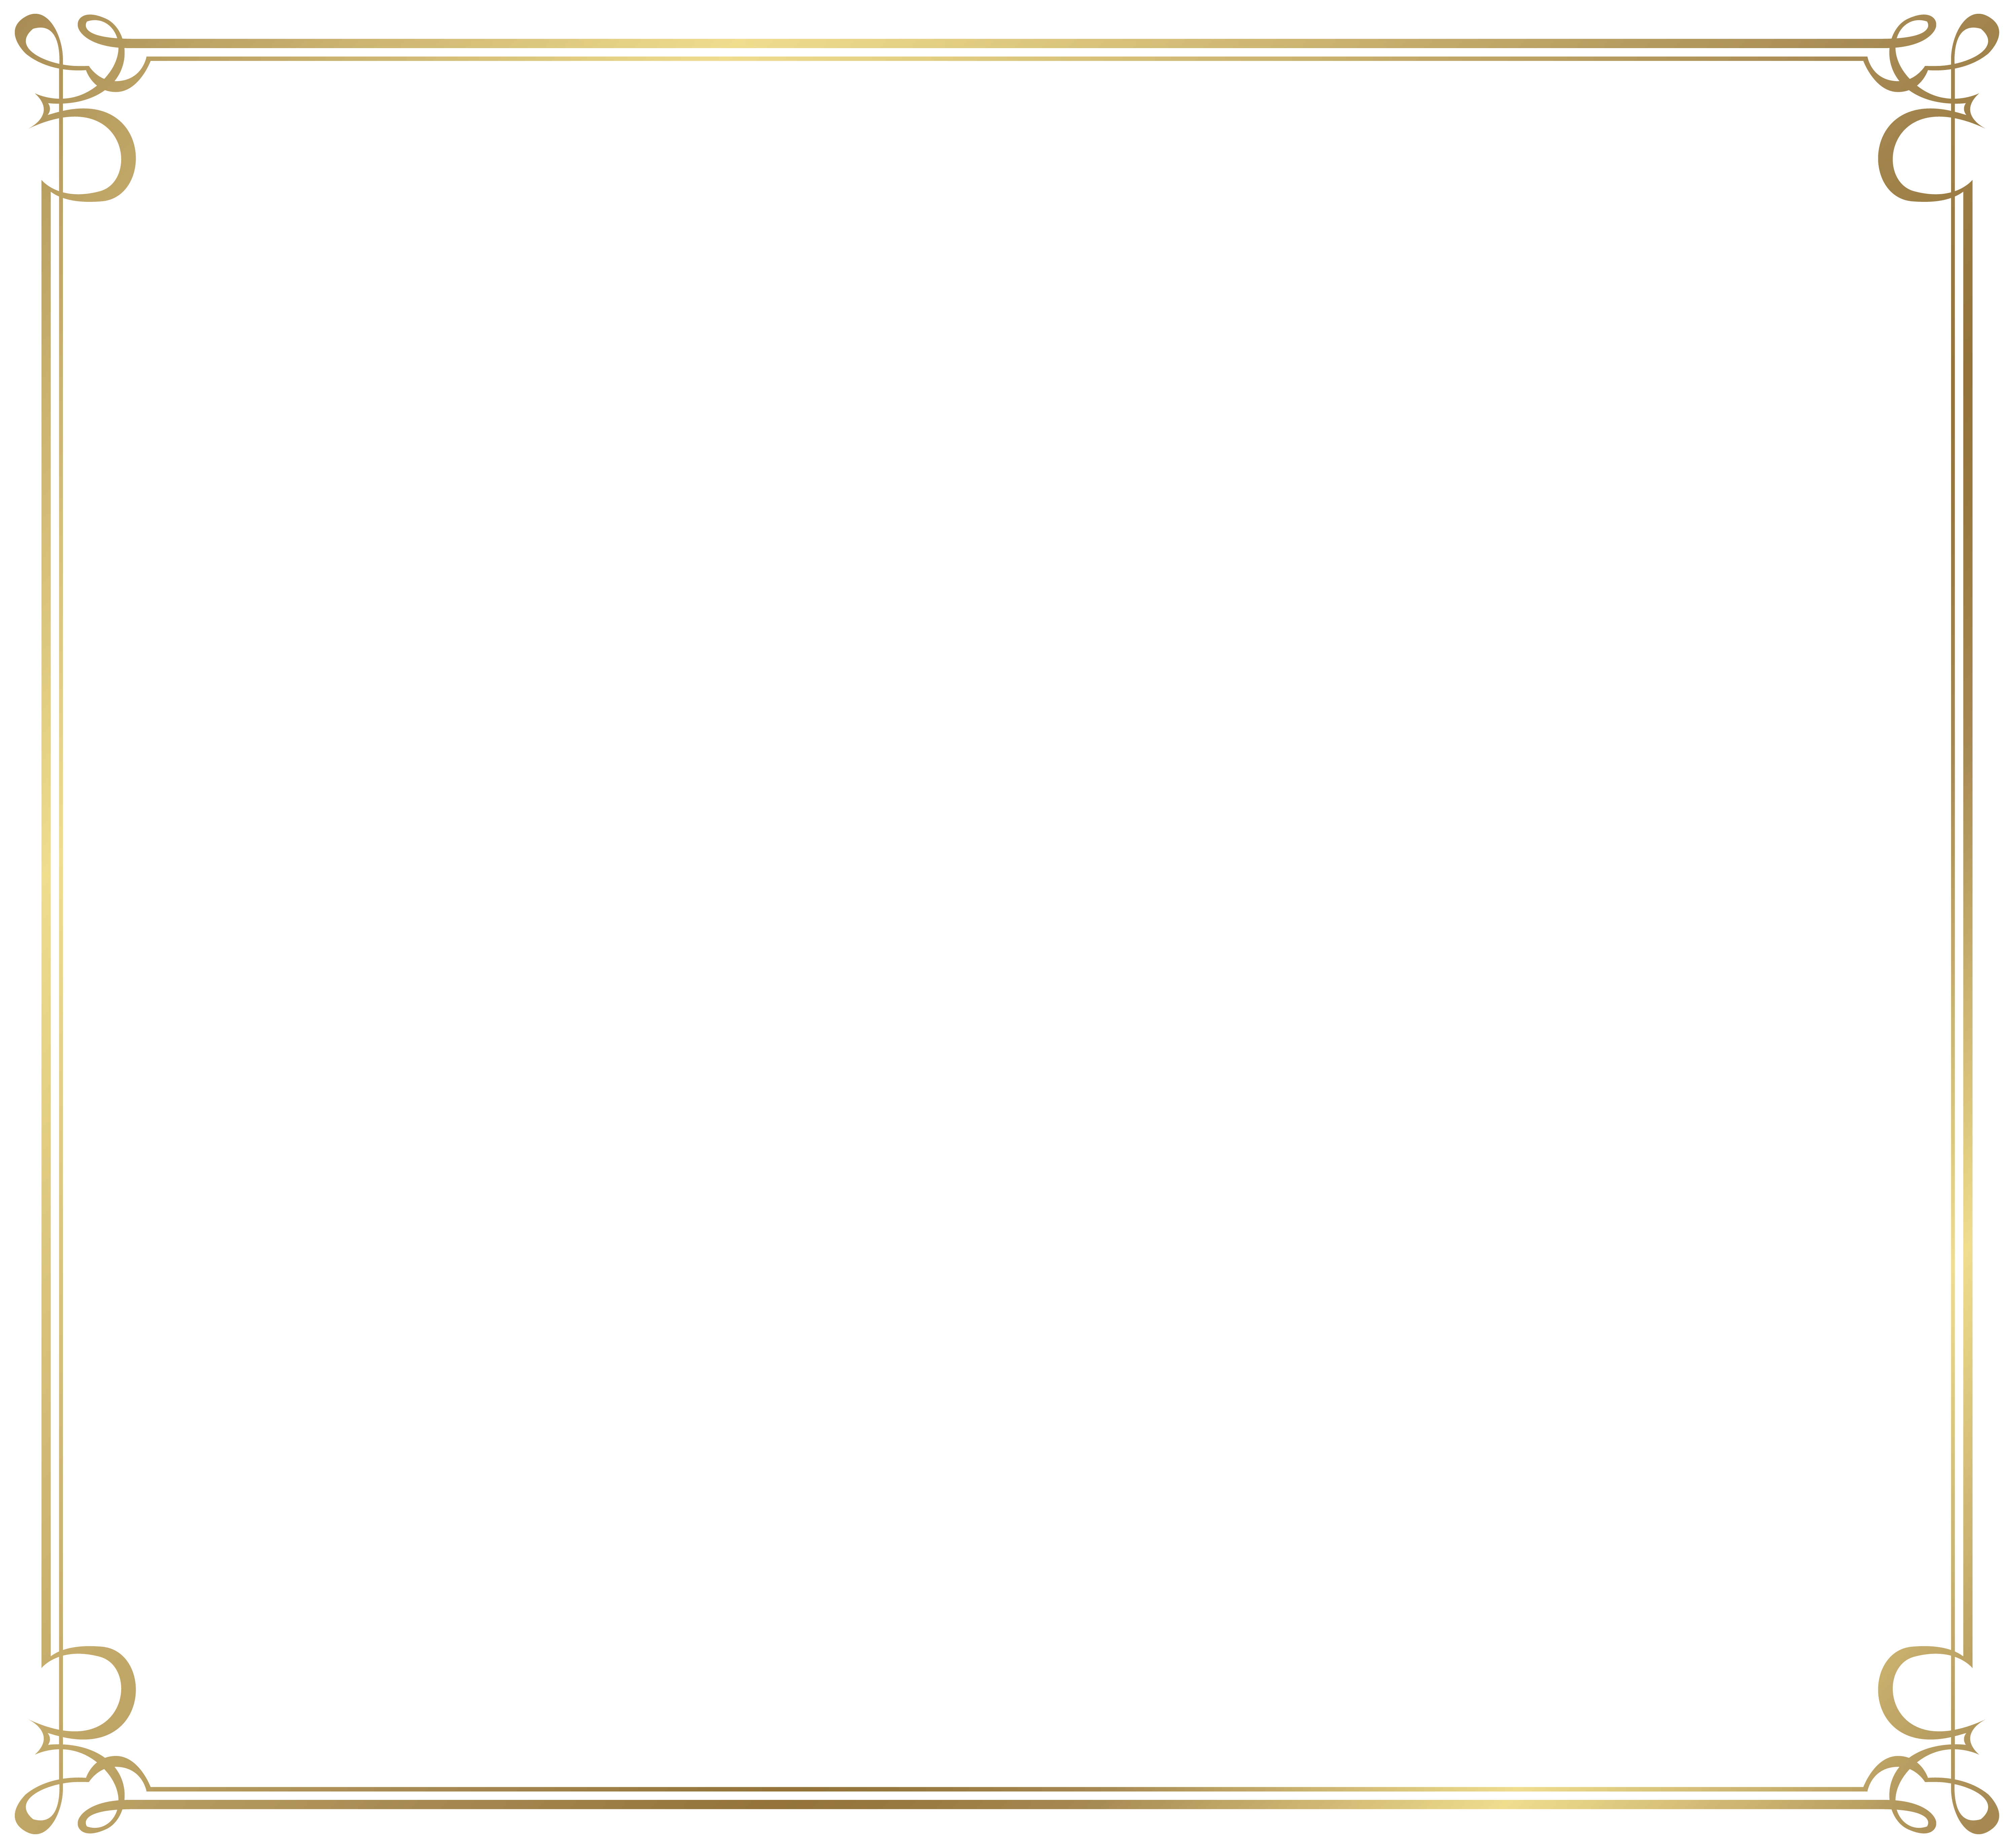 Decorative frame png. Images of border spacehero